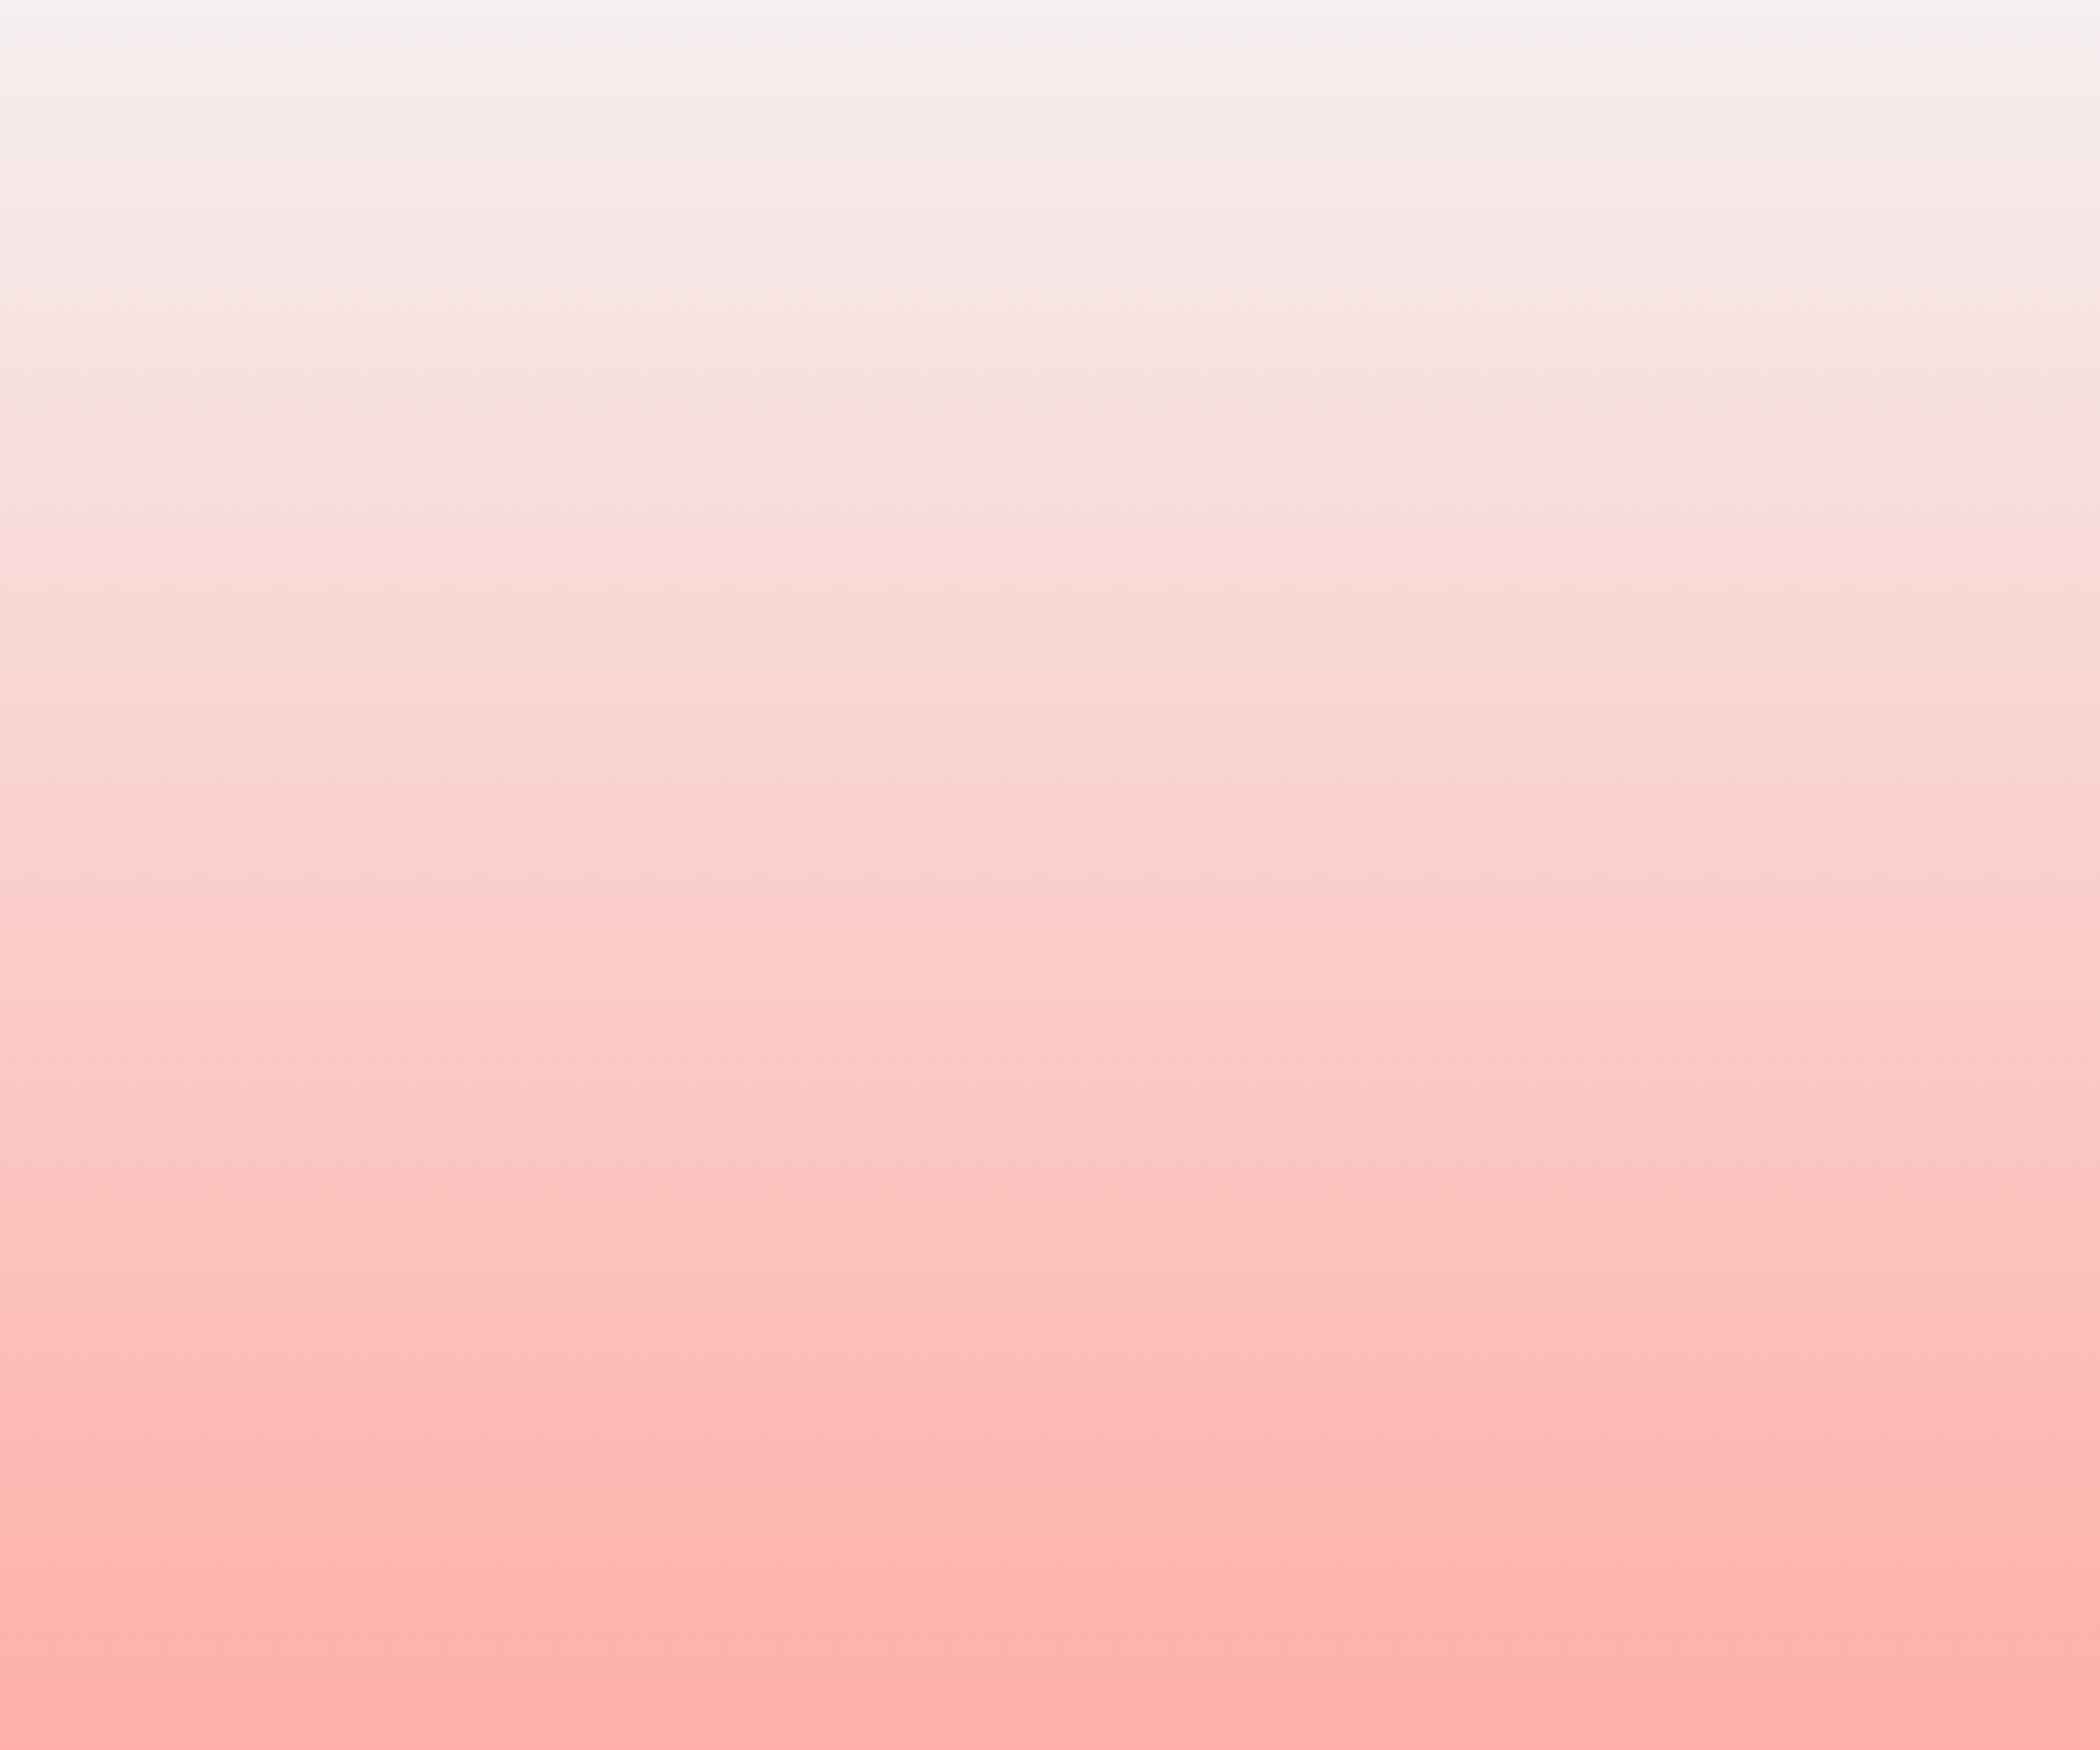 pink and grey gradient background